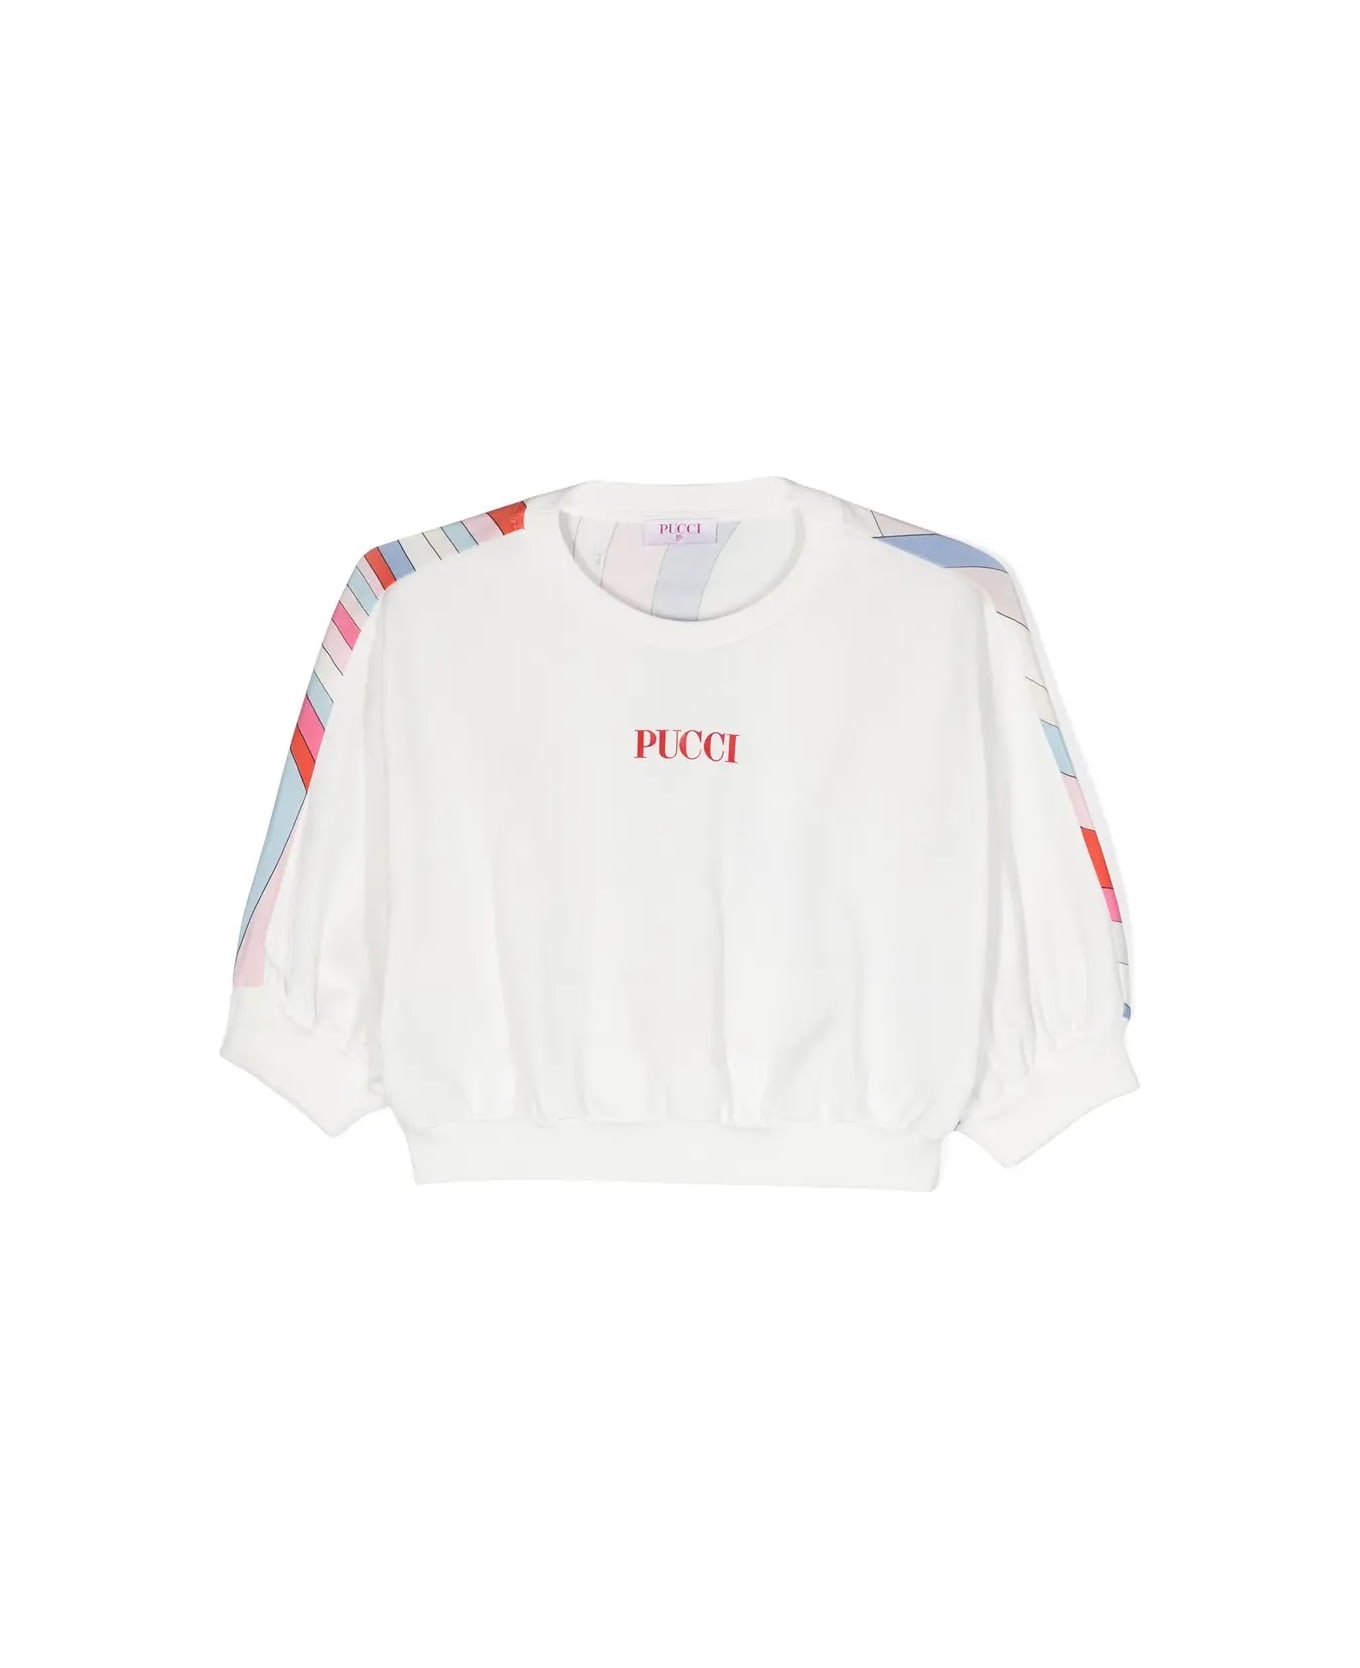 Pucci White Sweatshirt With Front Logo And Back Iride Print - White